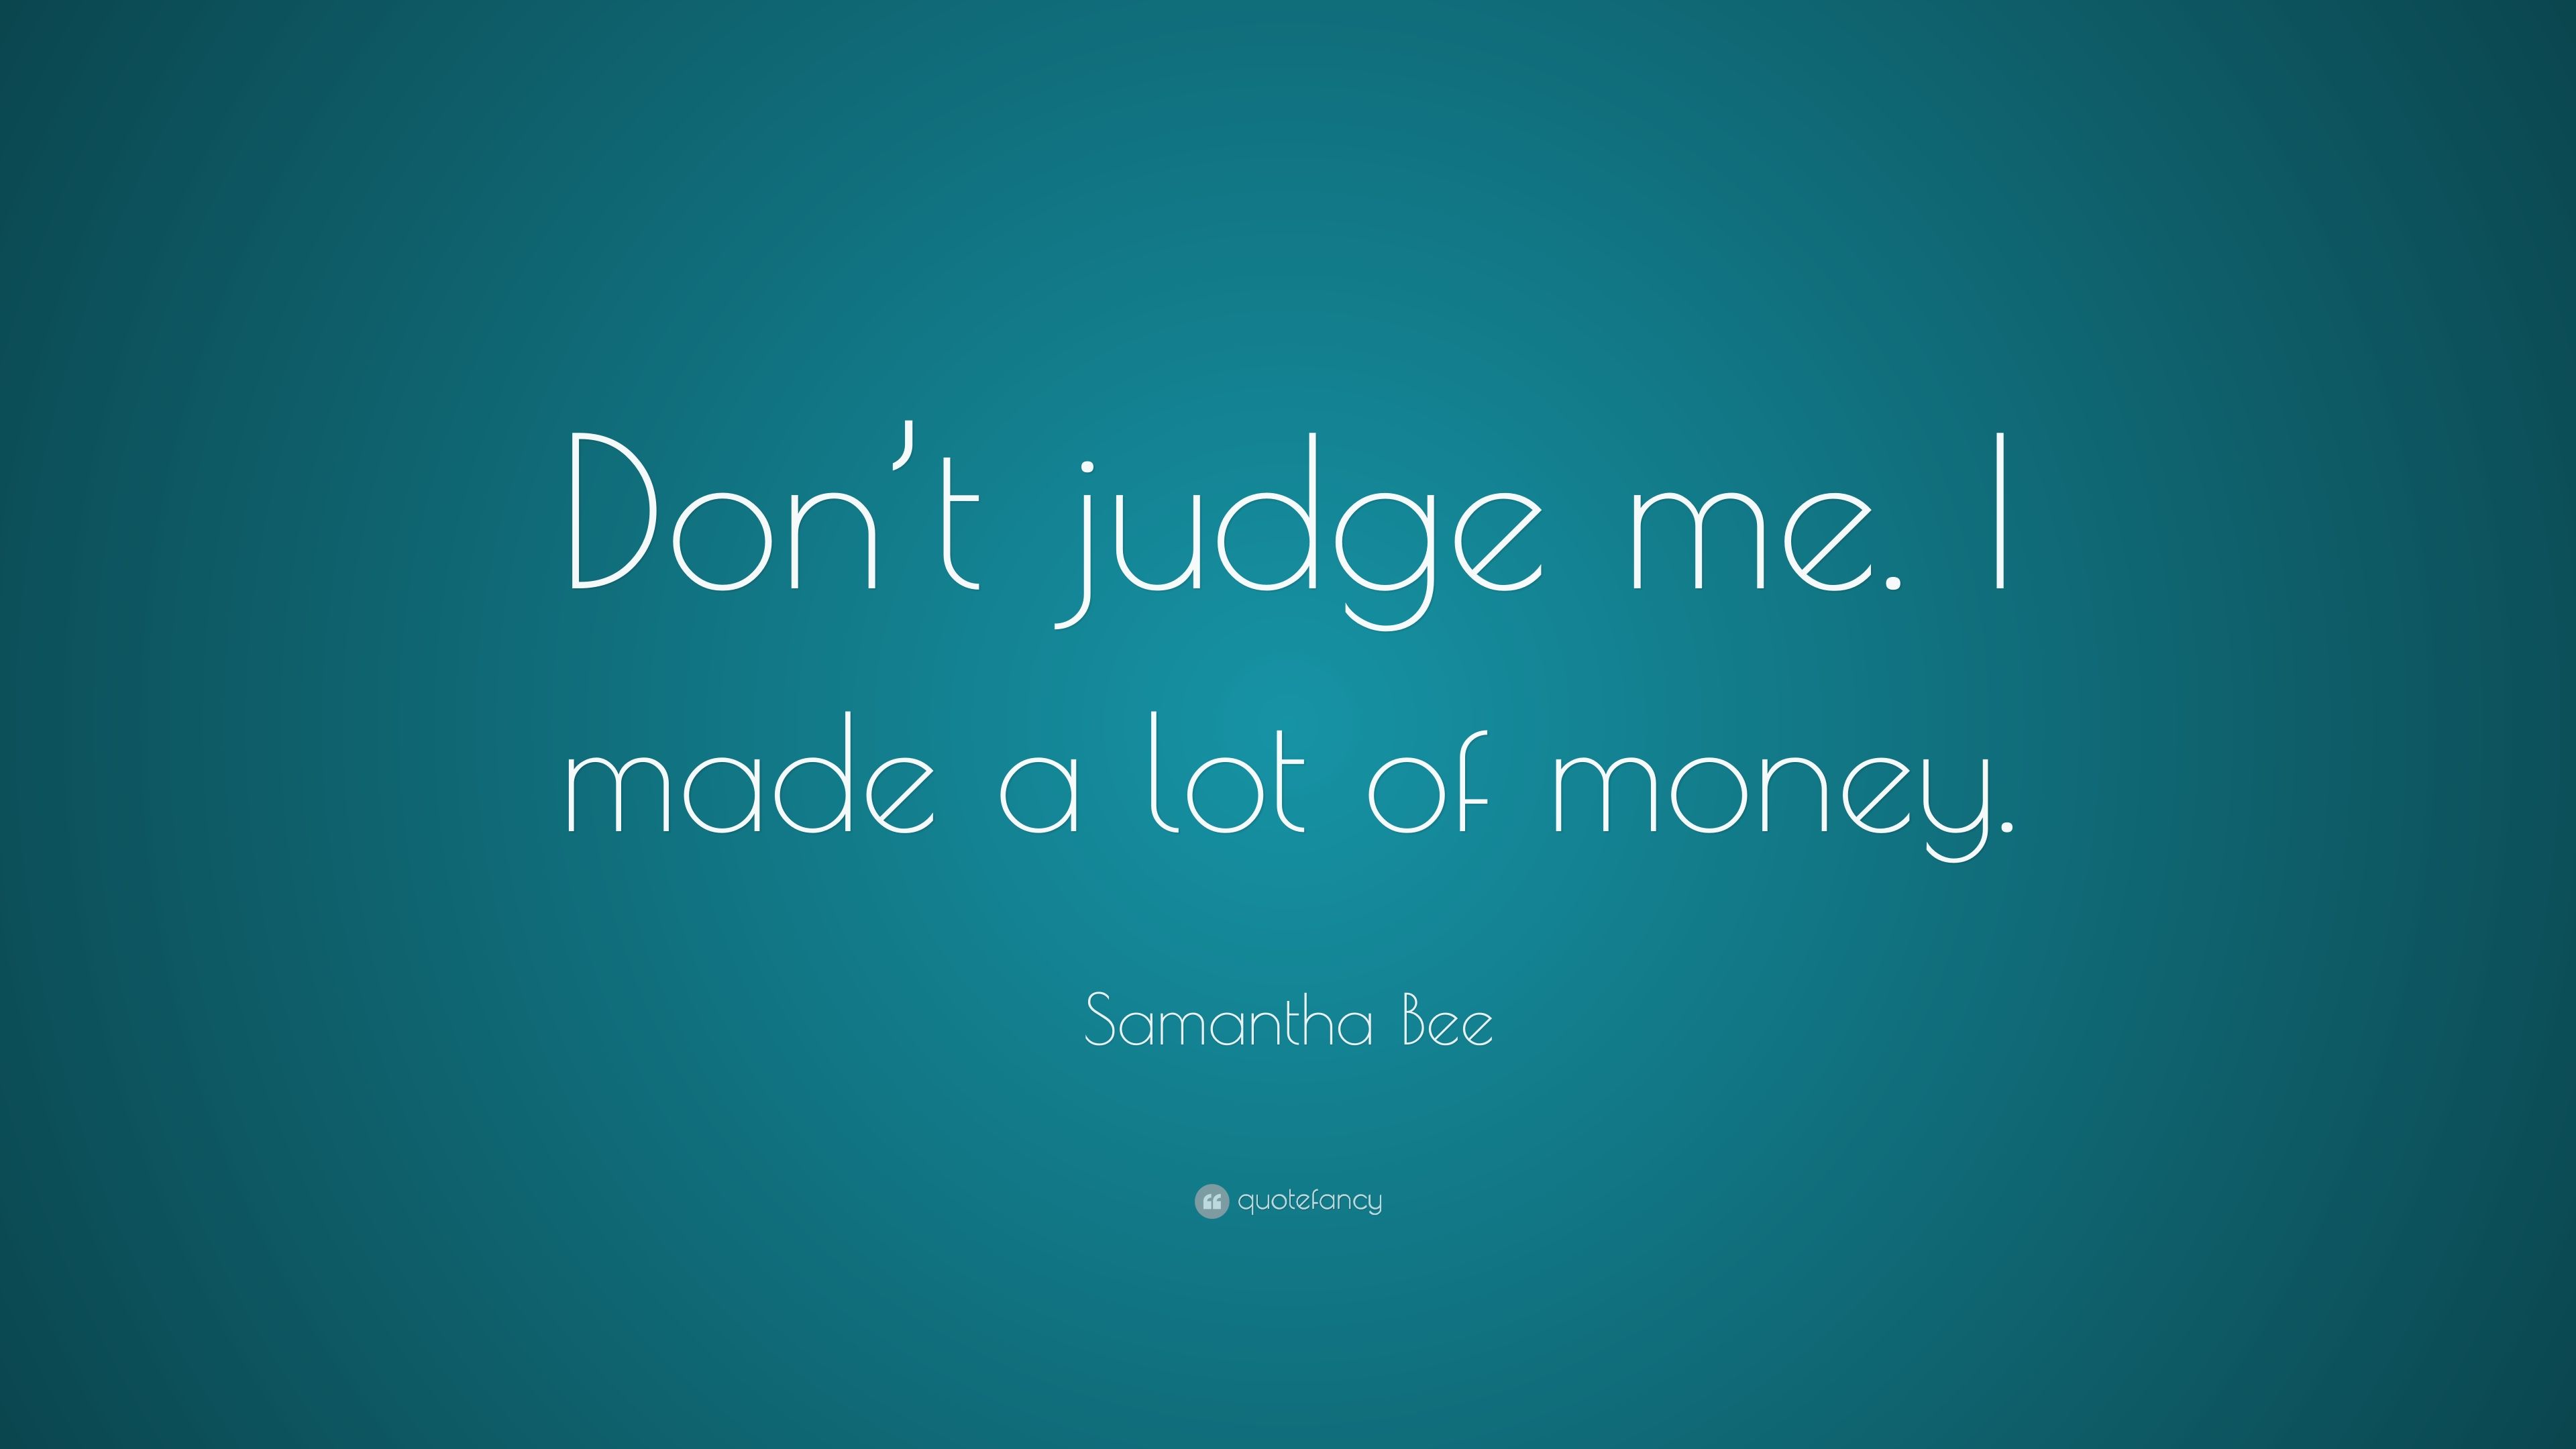 Samantha Bee Quote: “Don't judge me. I made a lot of money.”